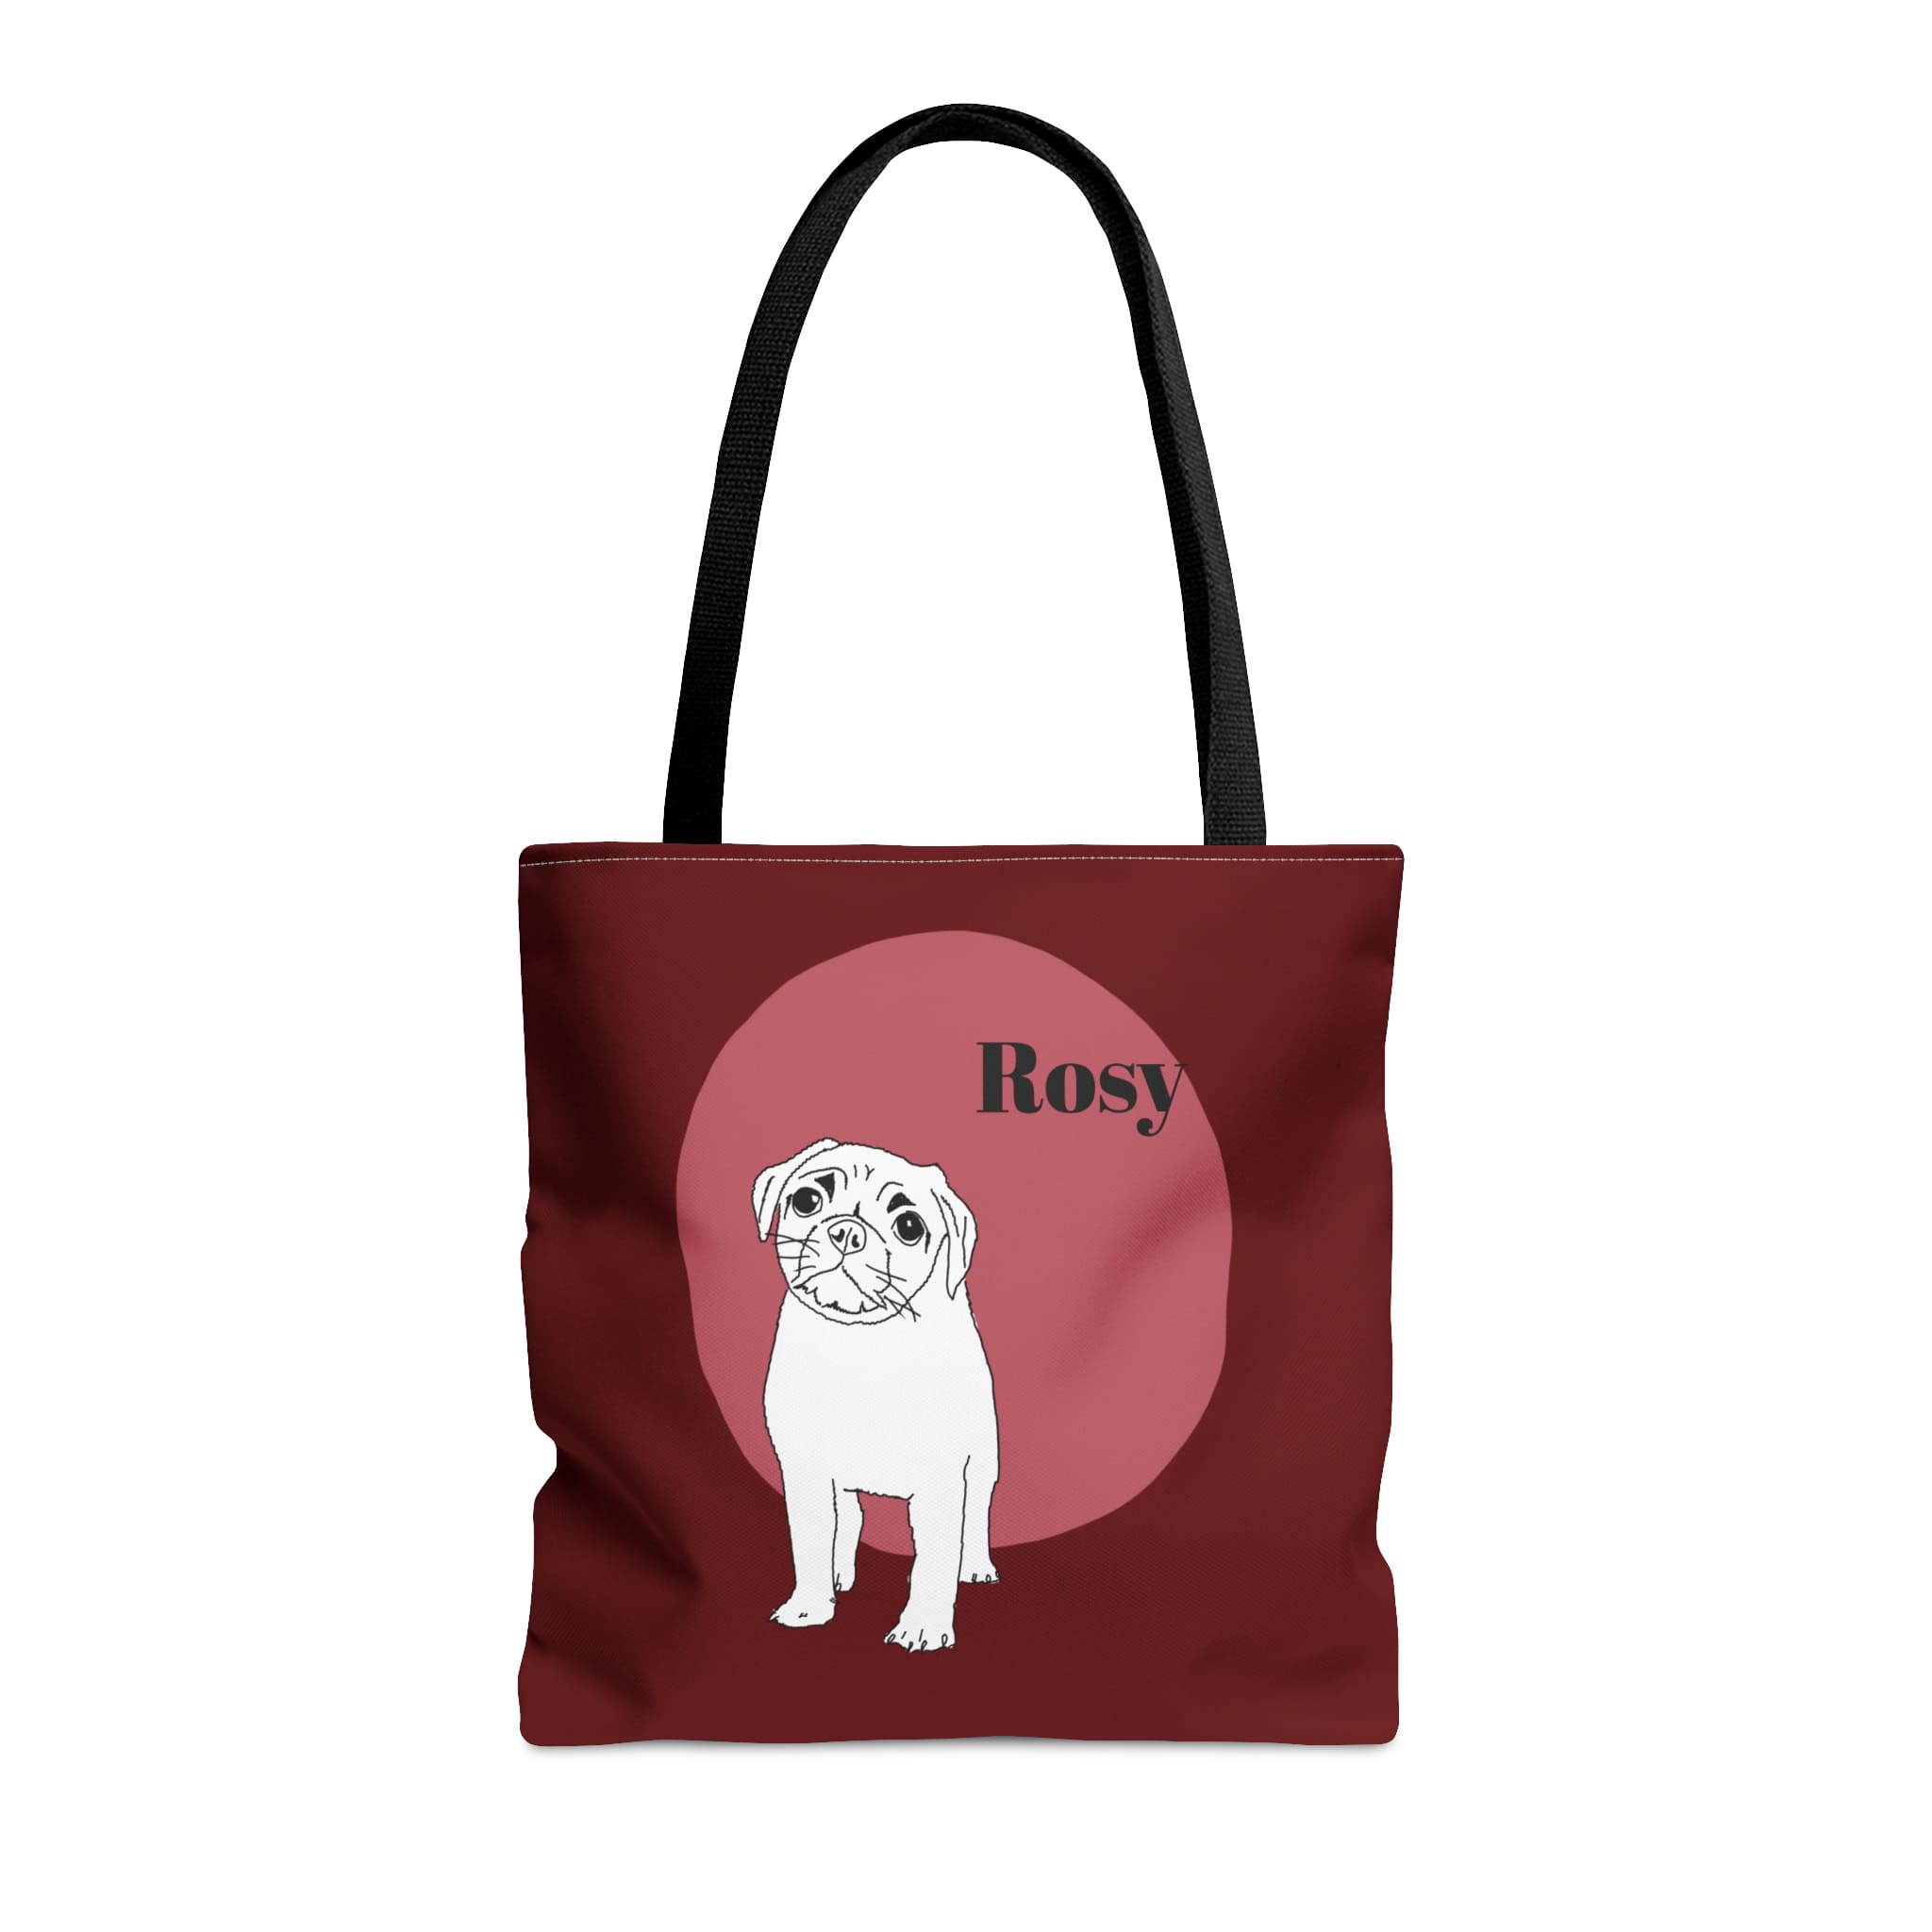 custom fashion tote bag in berry colors and line art portrait of your dog for pet moms and dads